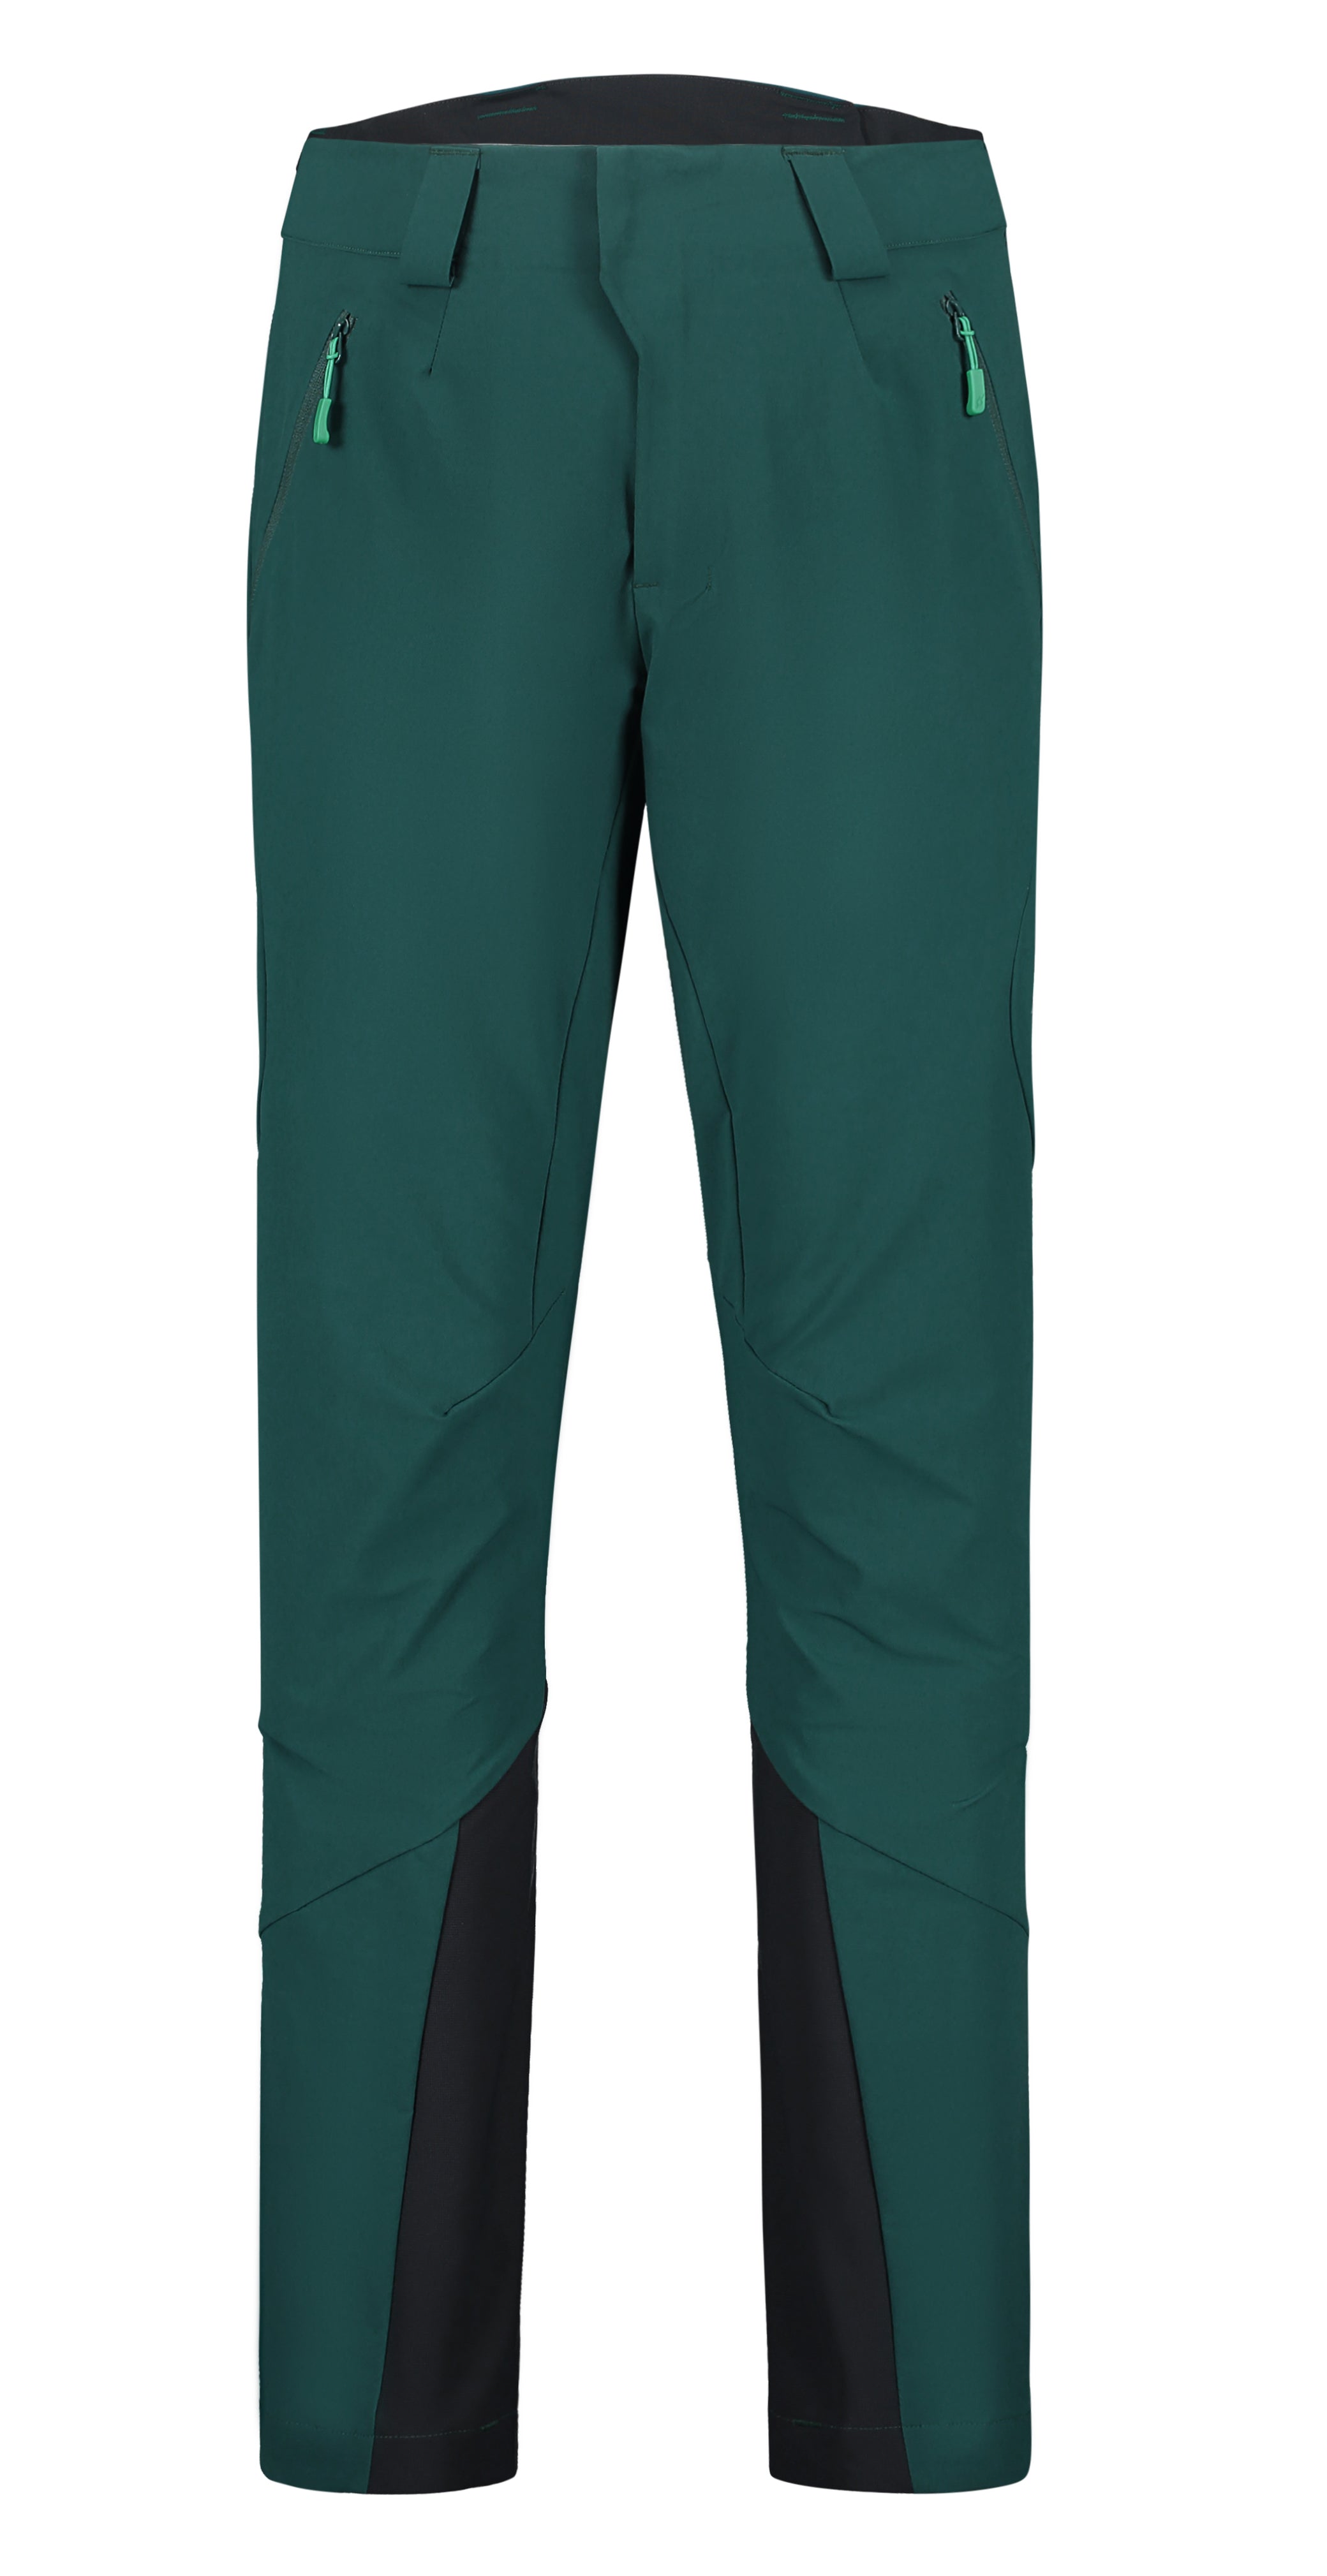 Rab Women's Khroma Ascendor AS Pants - Outfitters Store